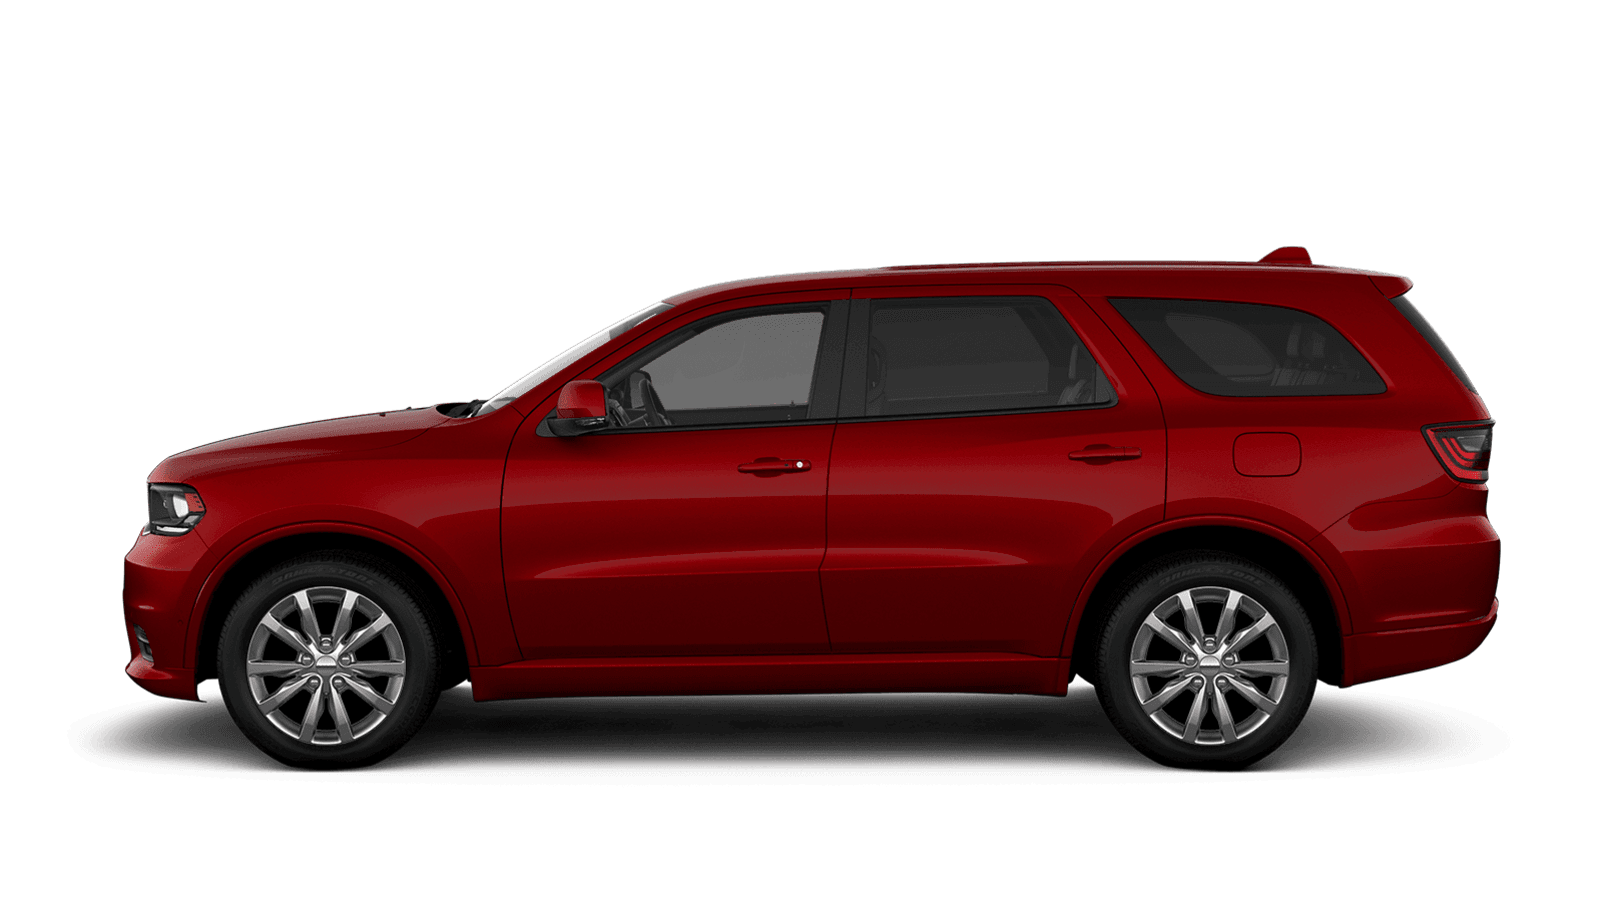 2019 Dodge Durango sideview with 18-inch aluminum wheels